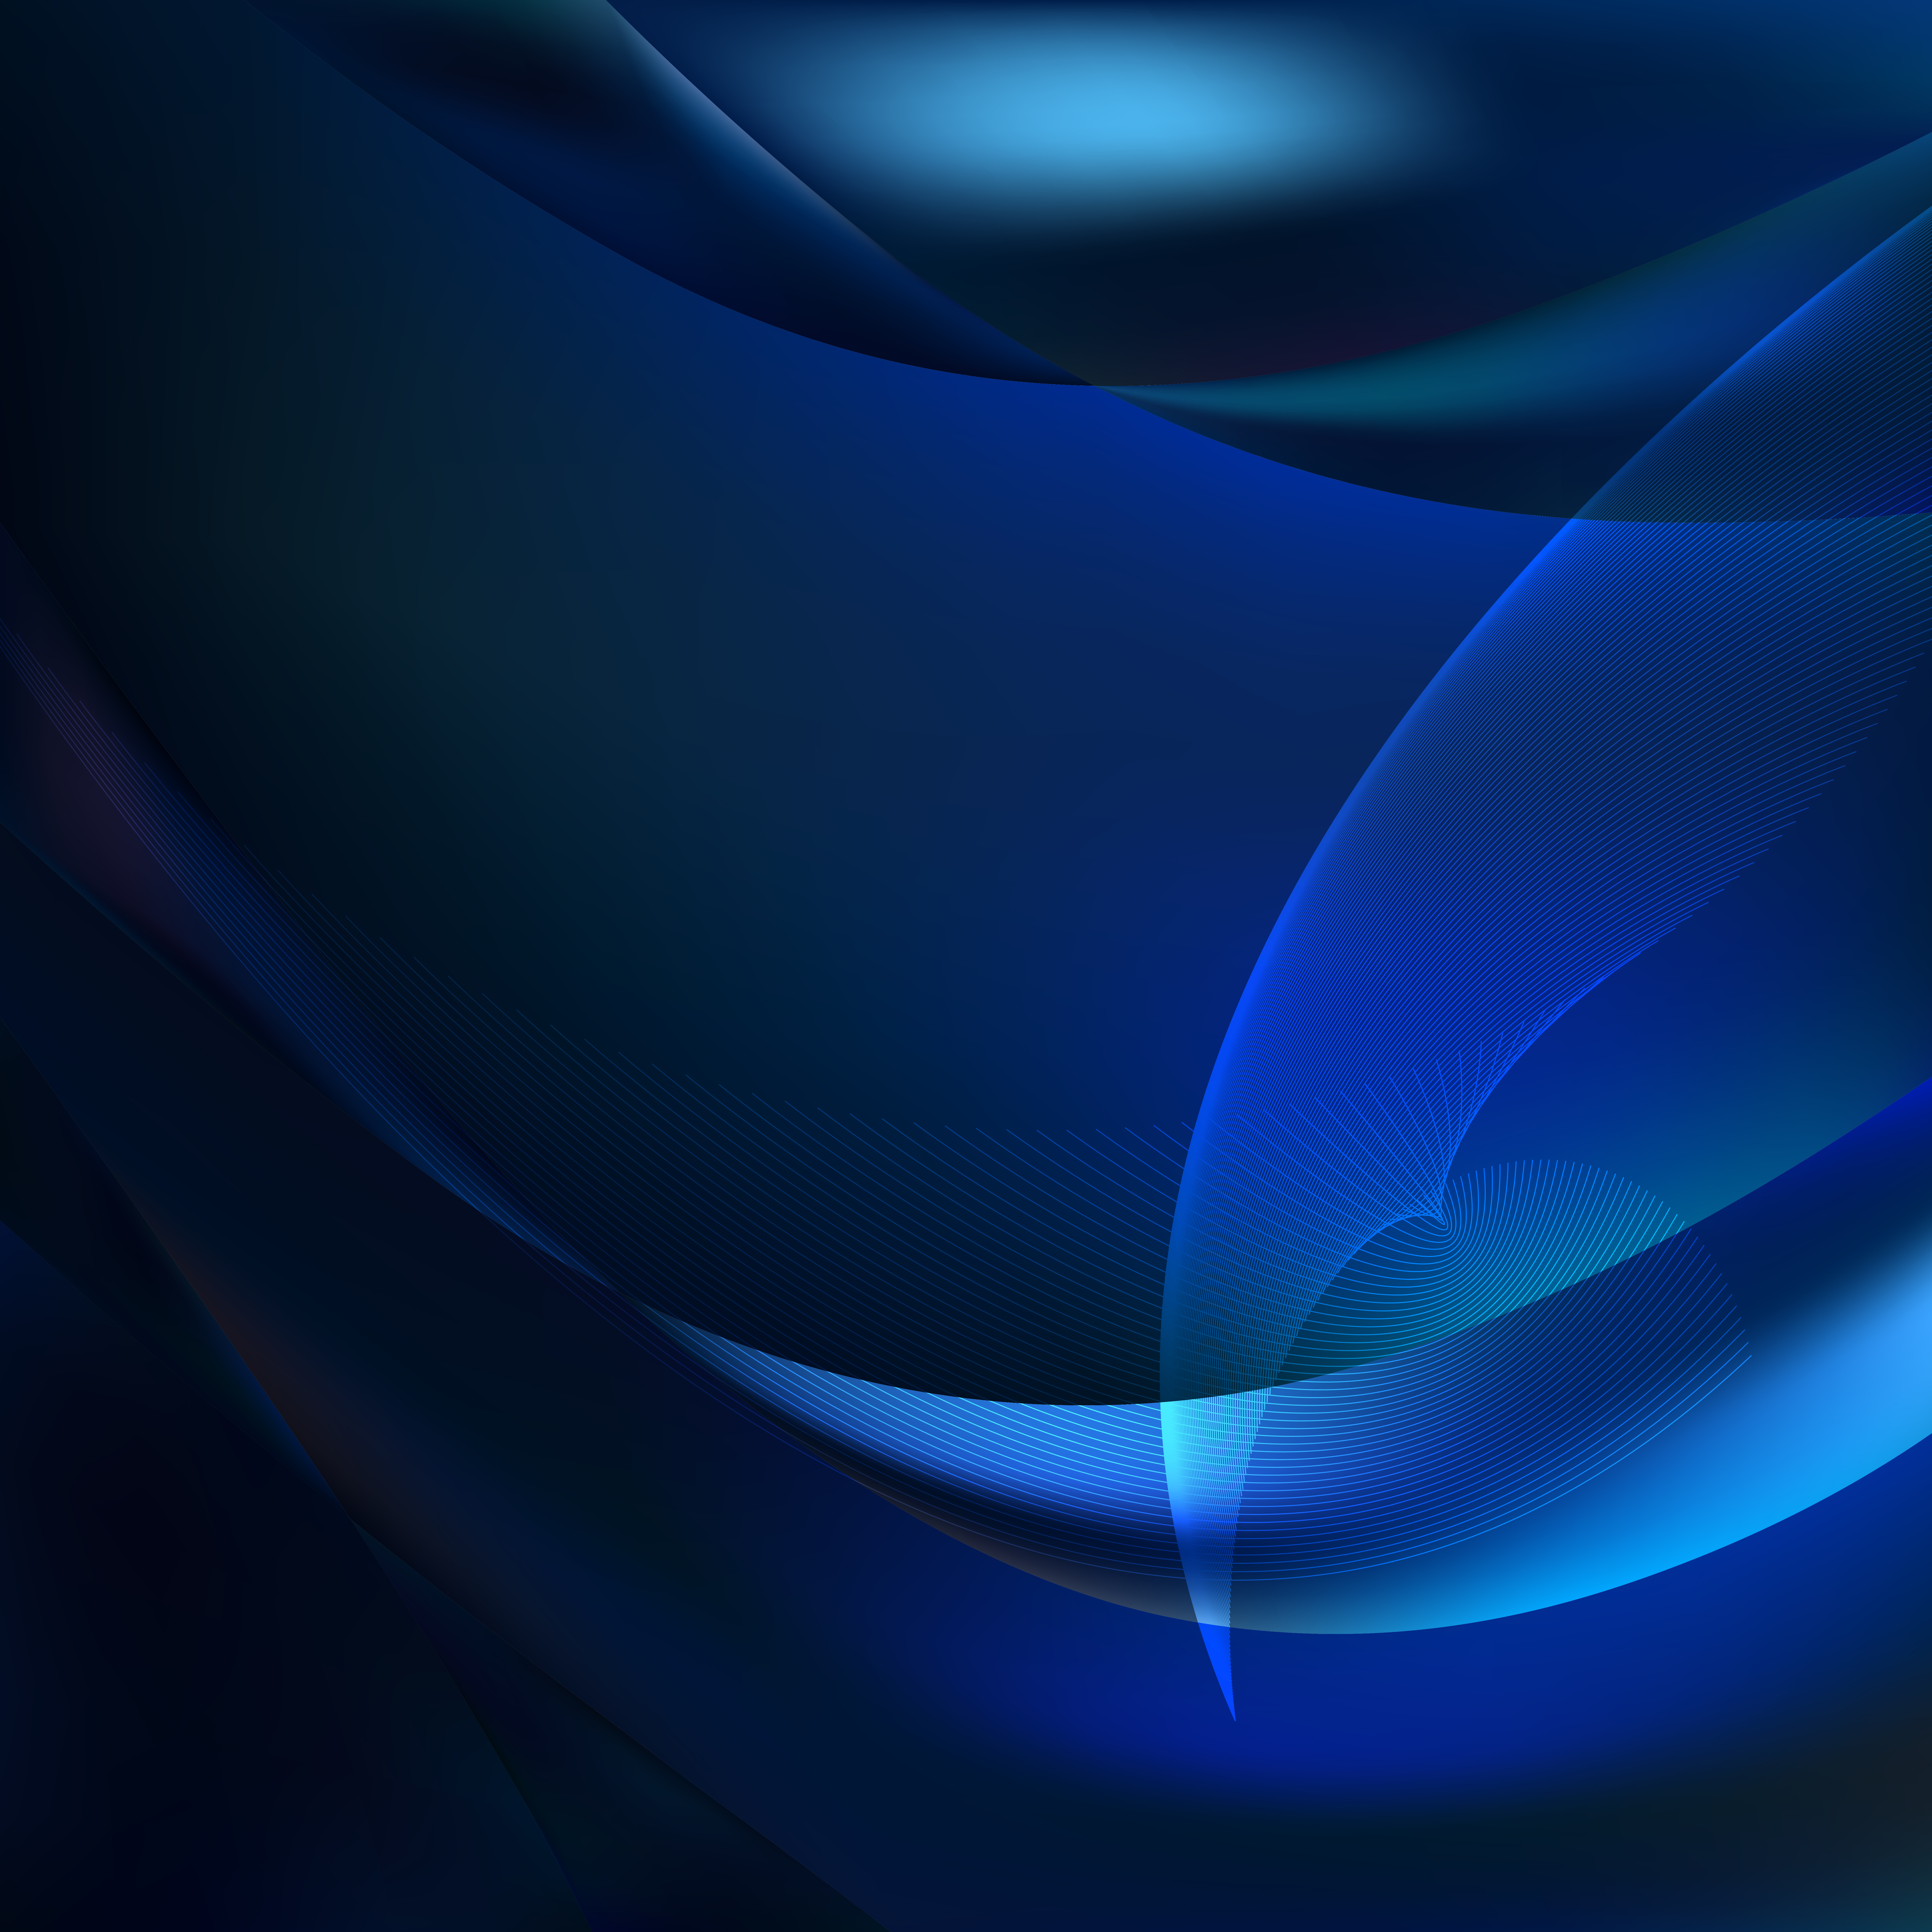 Free Abstract Cool Blue Flow Curves Background